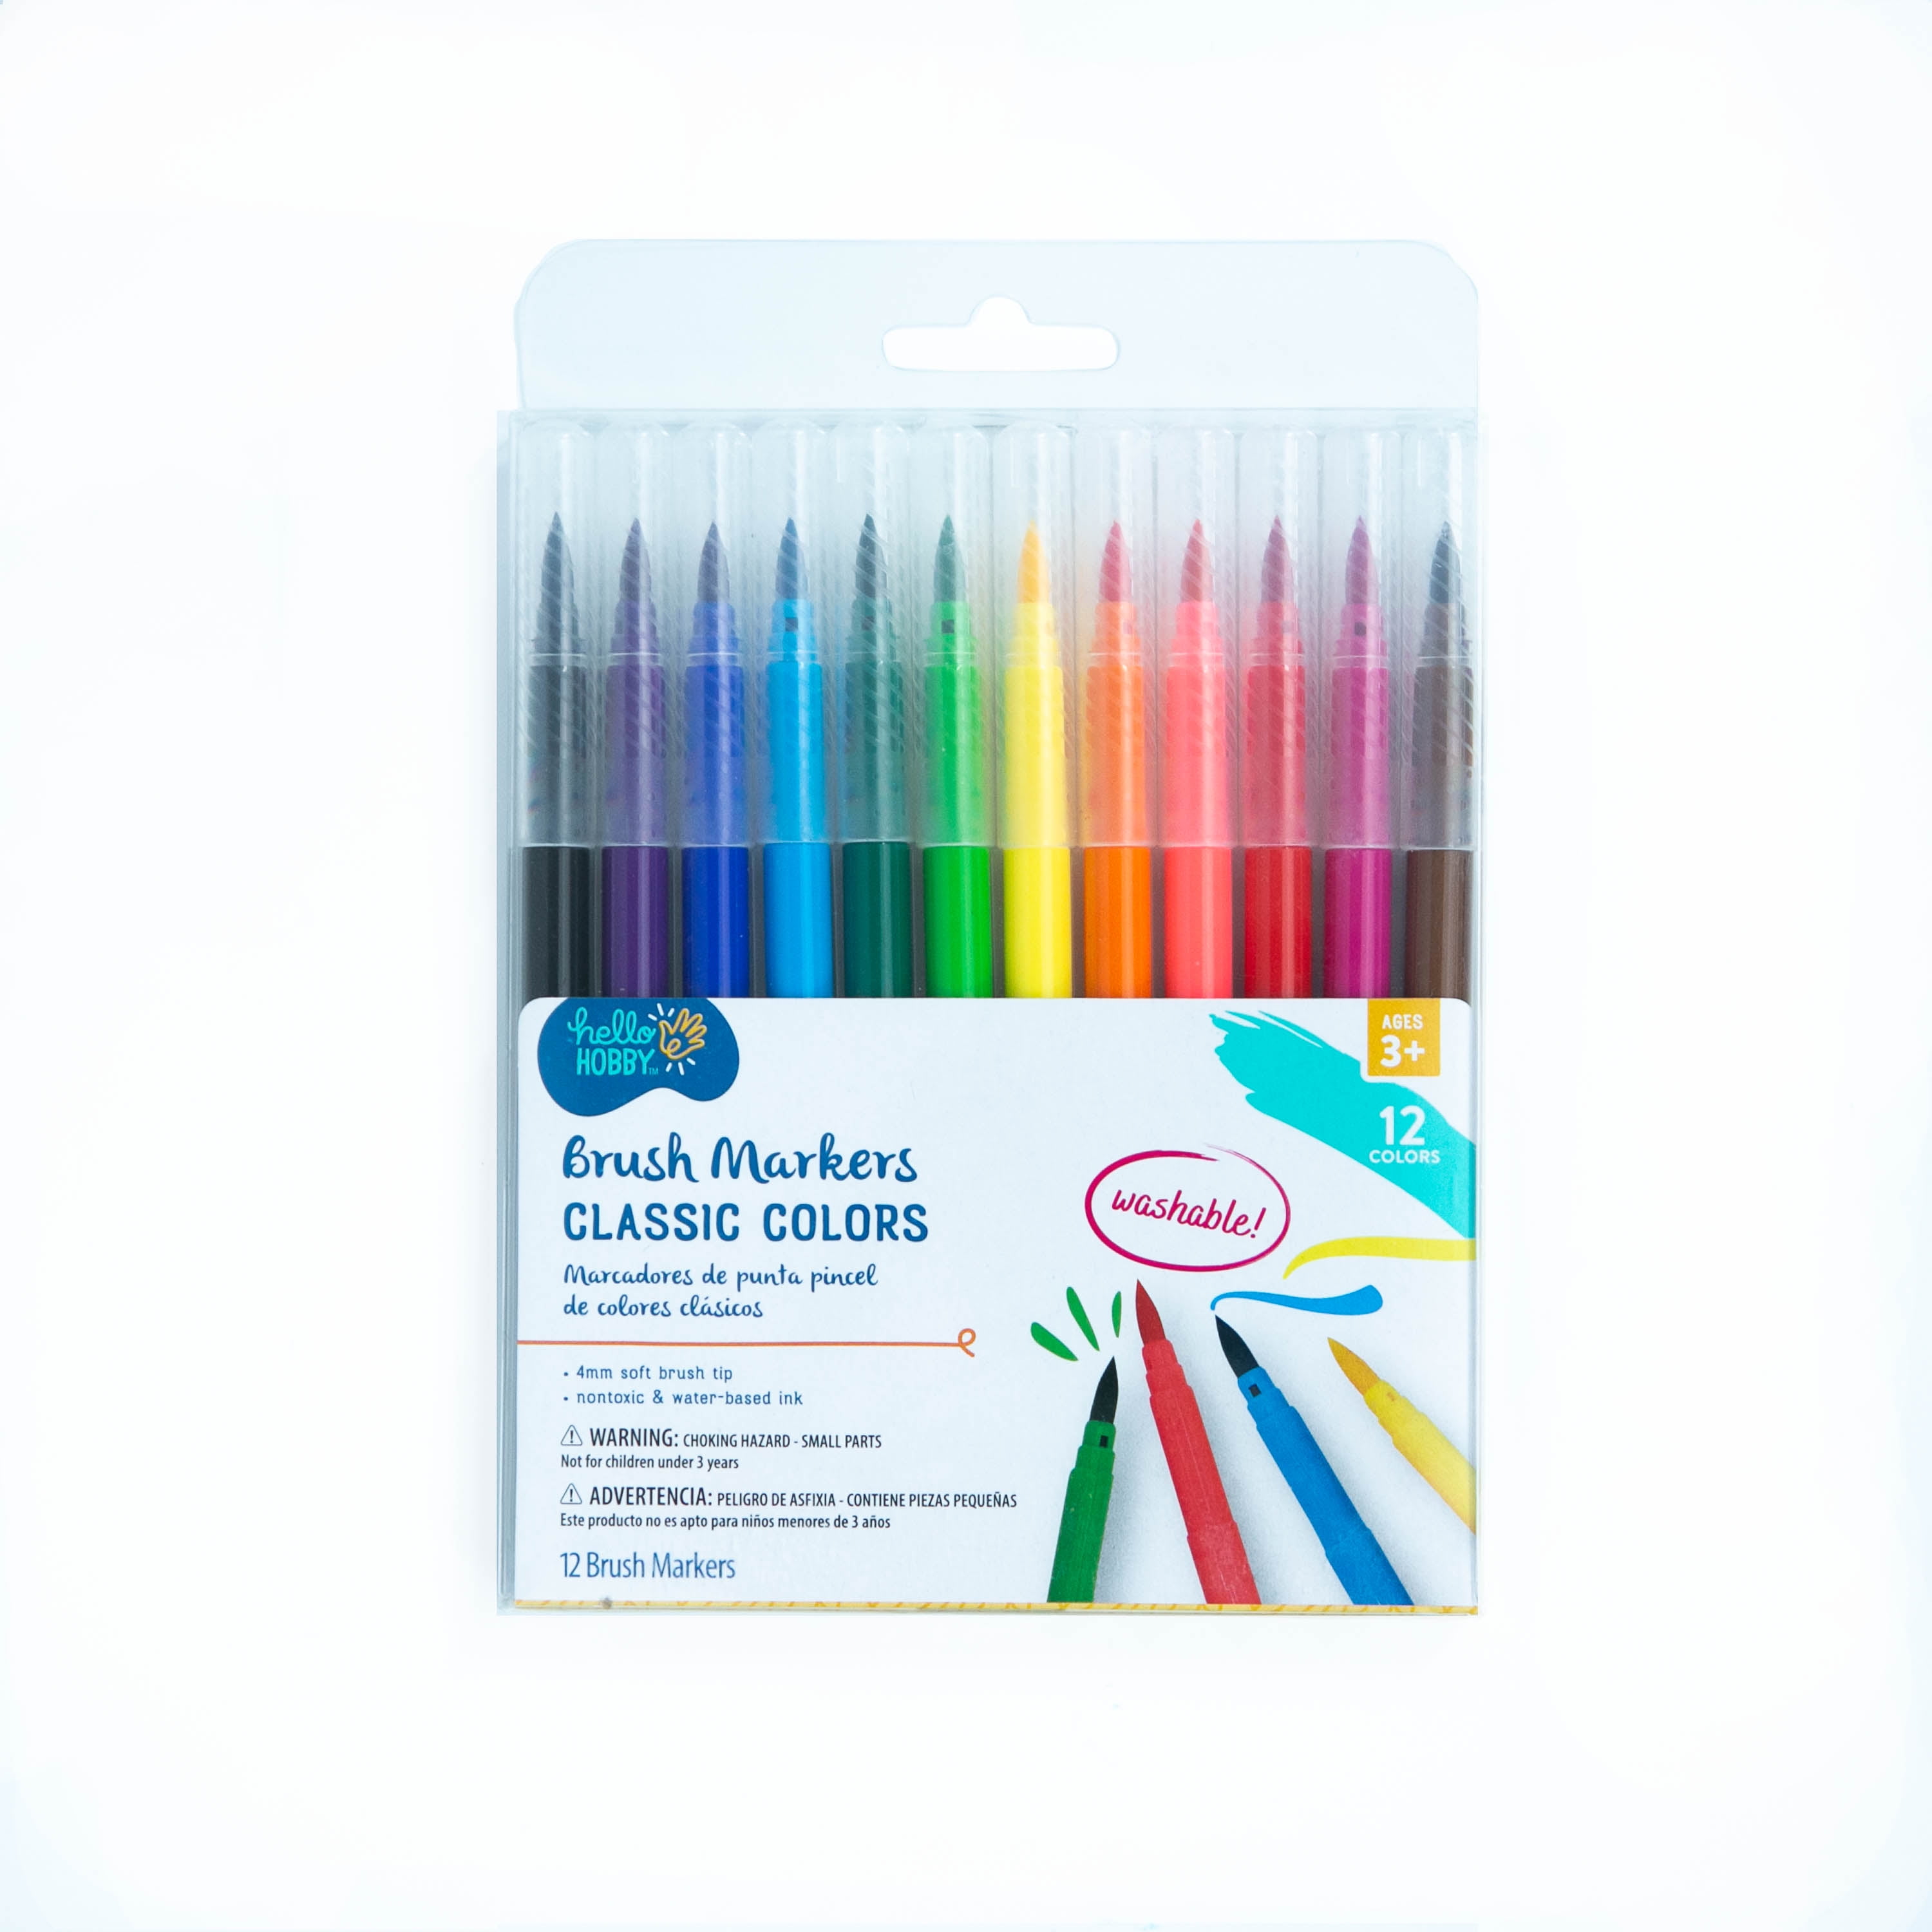 nood Mompelen mini Hello Hobby Brush Markers with Washable Ink, Bullet Tip, Classic Colors,  12Pcs, #40137 - Walmart.com